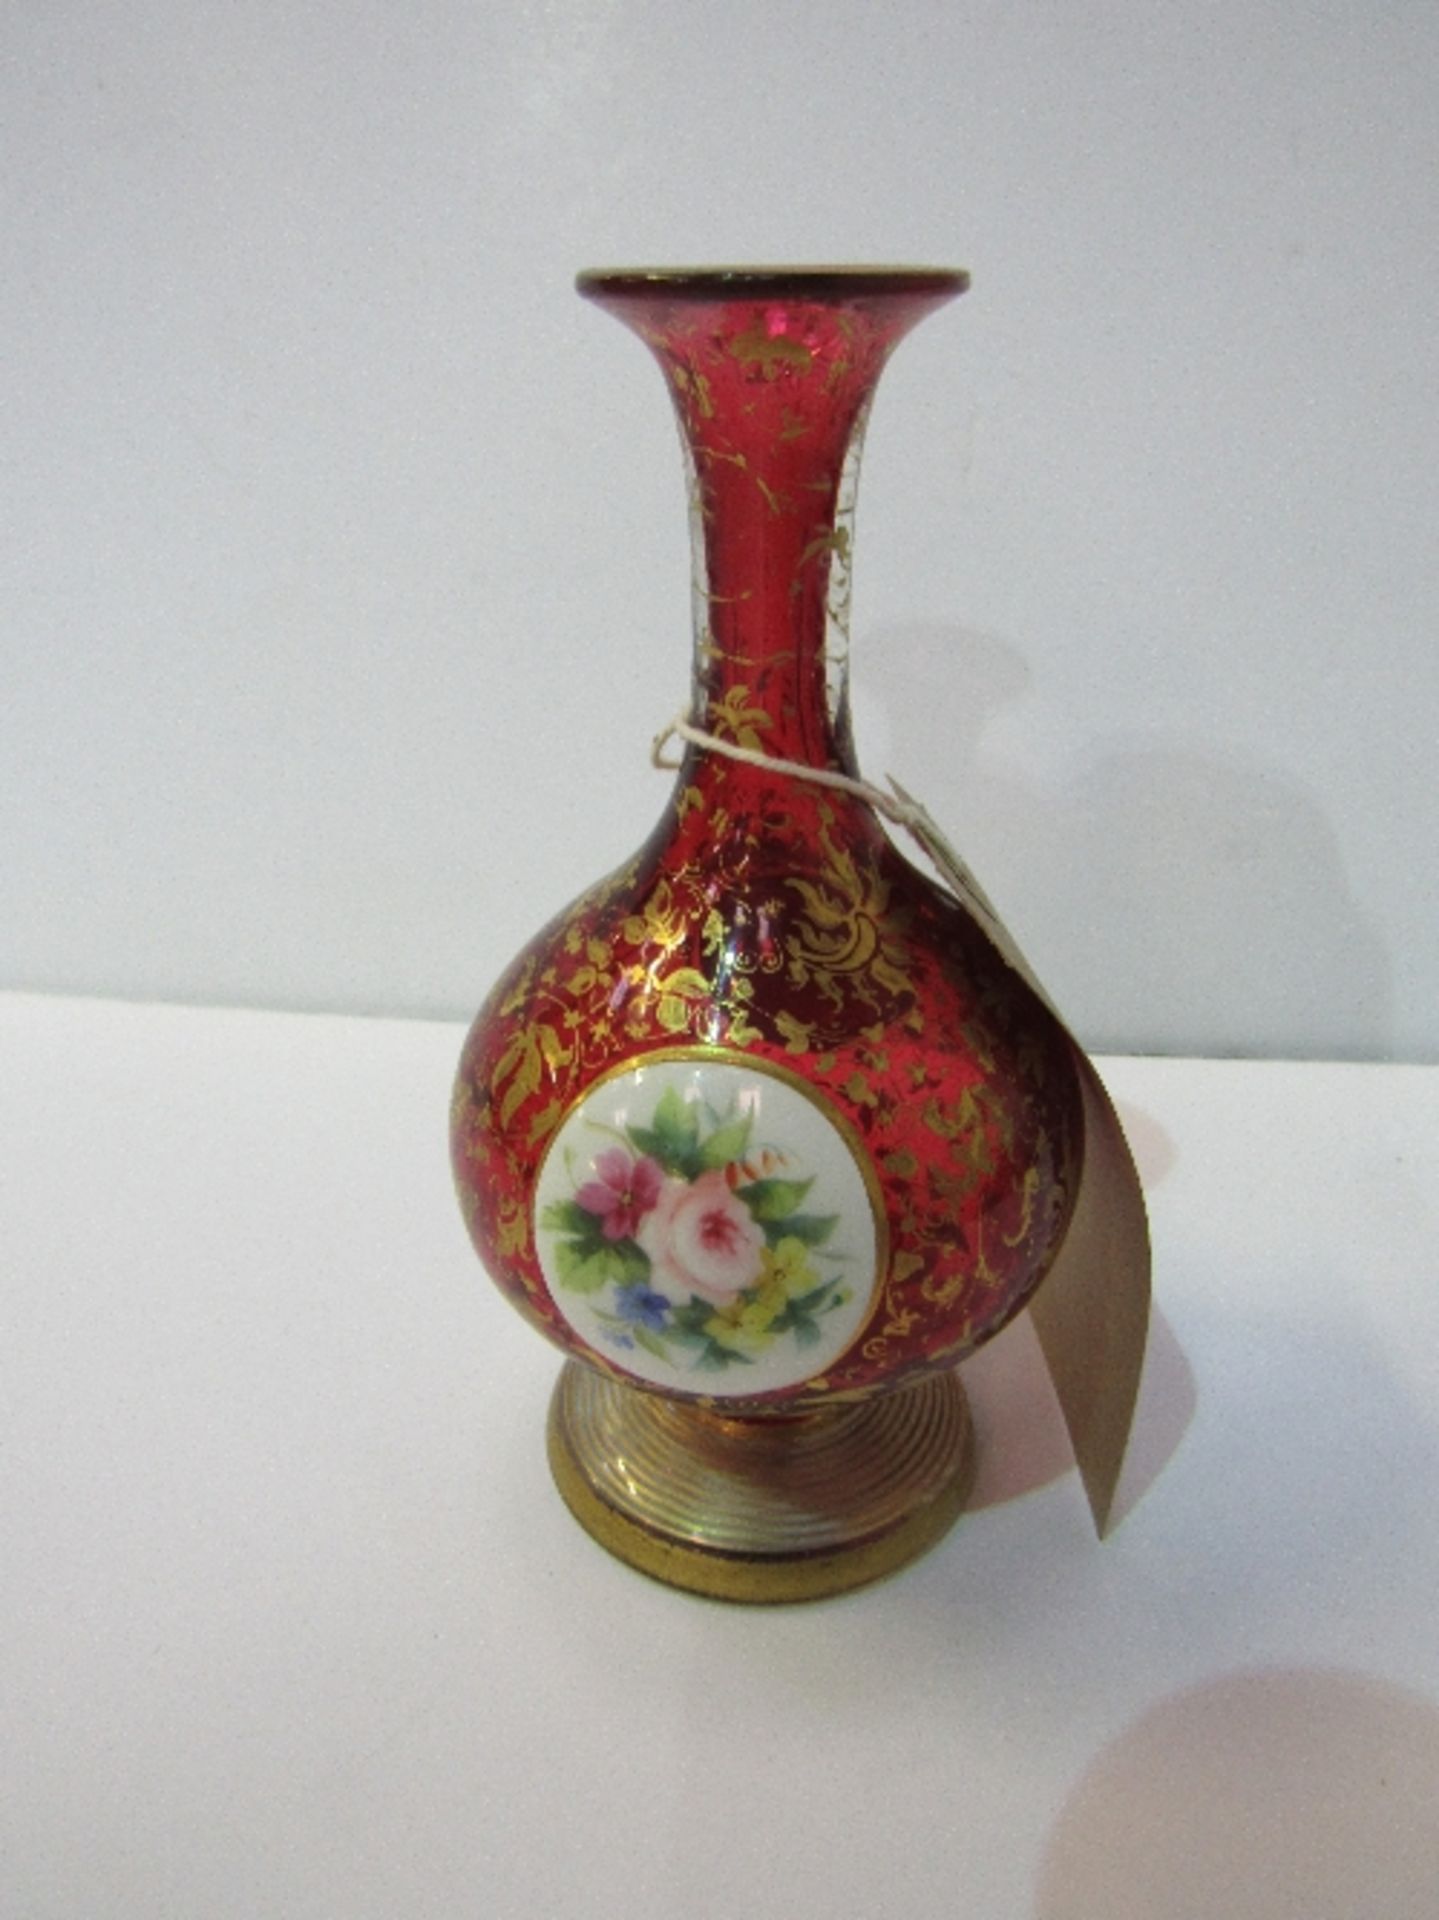 Bohemian Ruby glass vase with gilt overlay with hand-painted miniature of a girl & flowers. Estimate